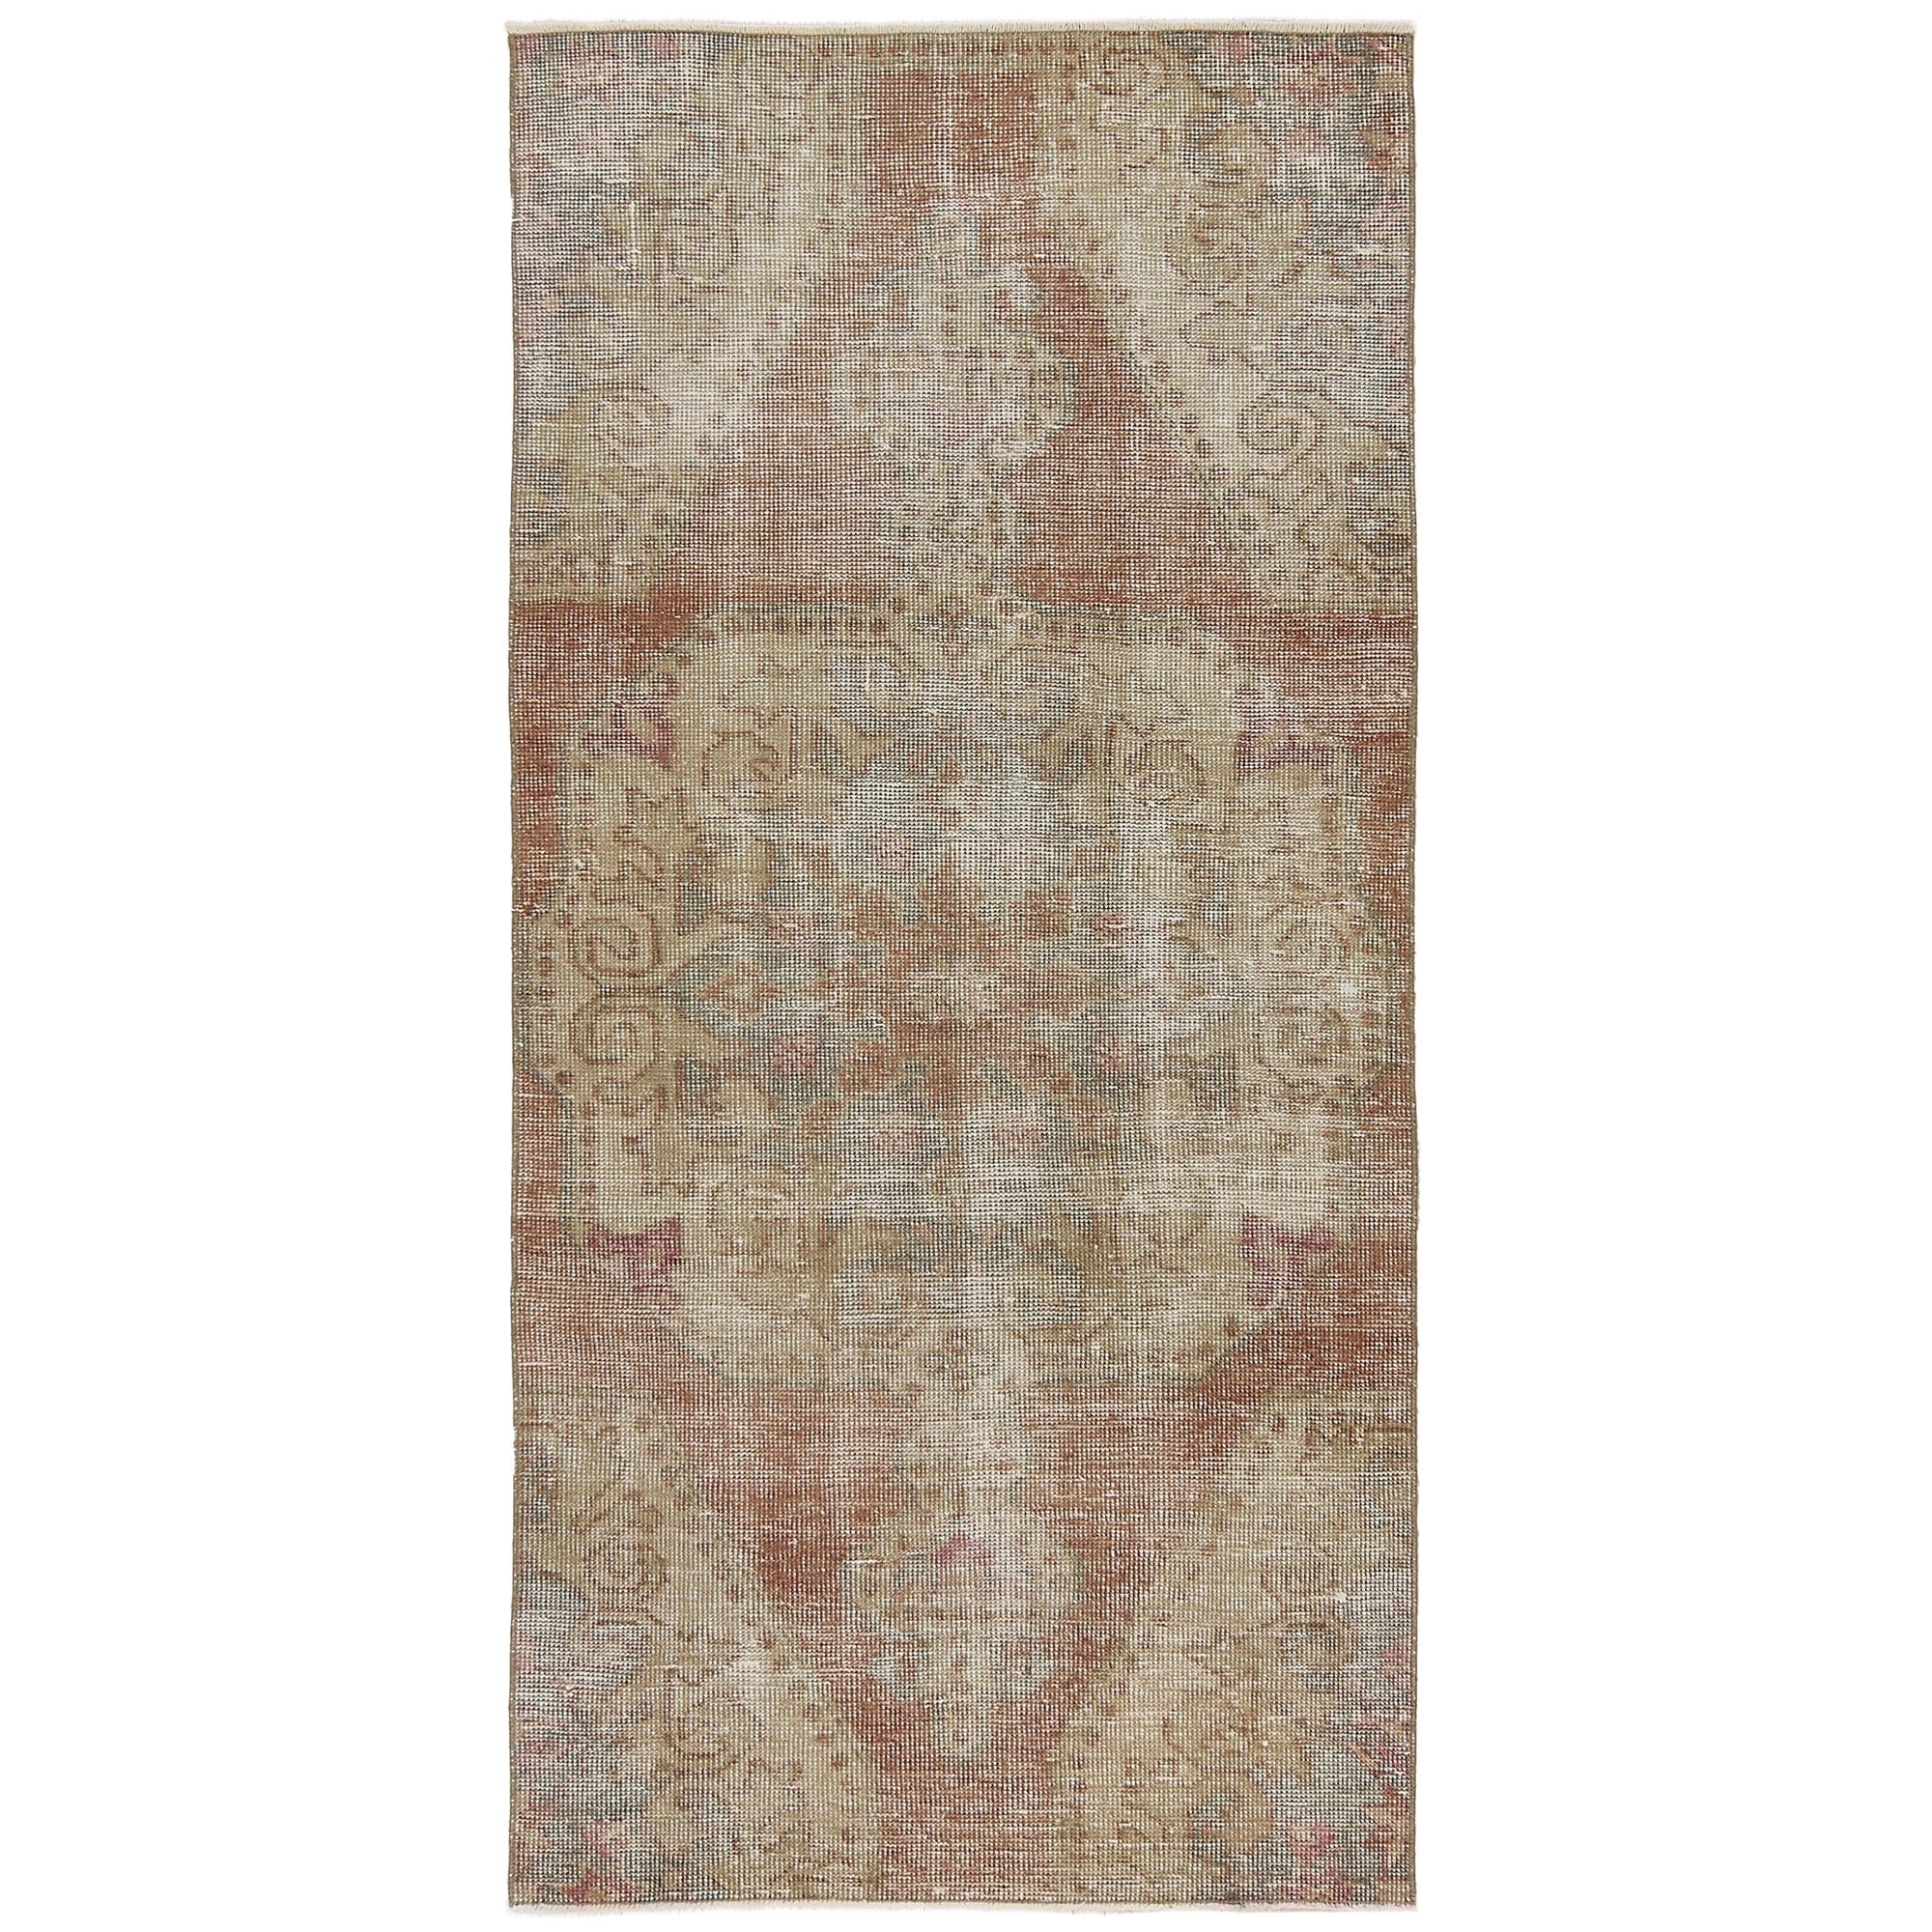 Aria's Charm | Authentic Turkish Rug | Hand-Knotted Carpet | Kuden Rugs